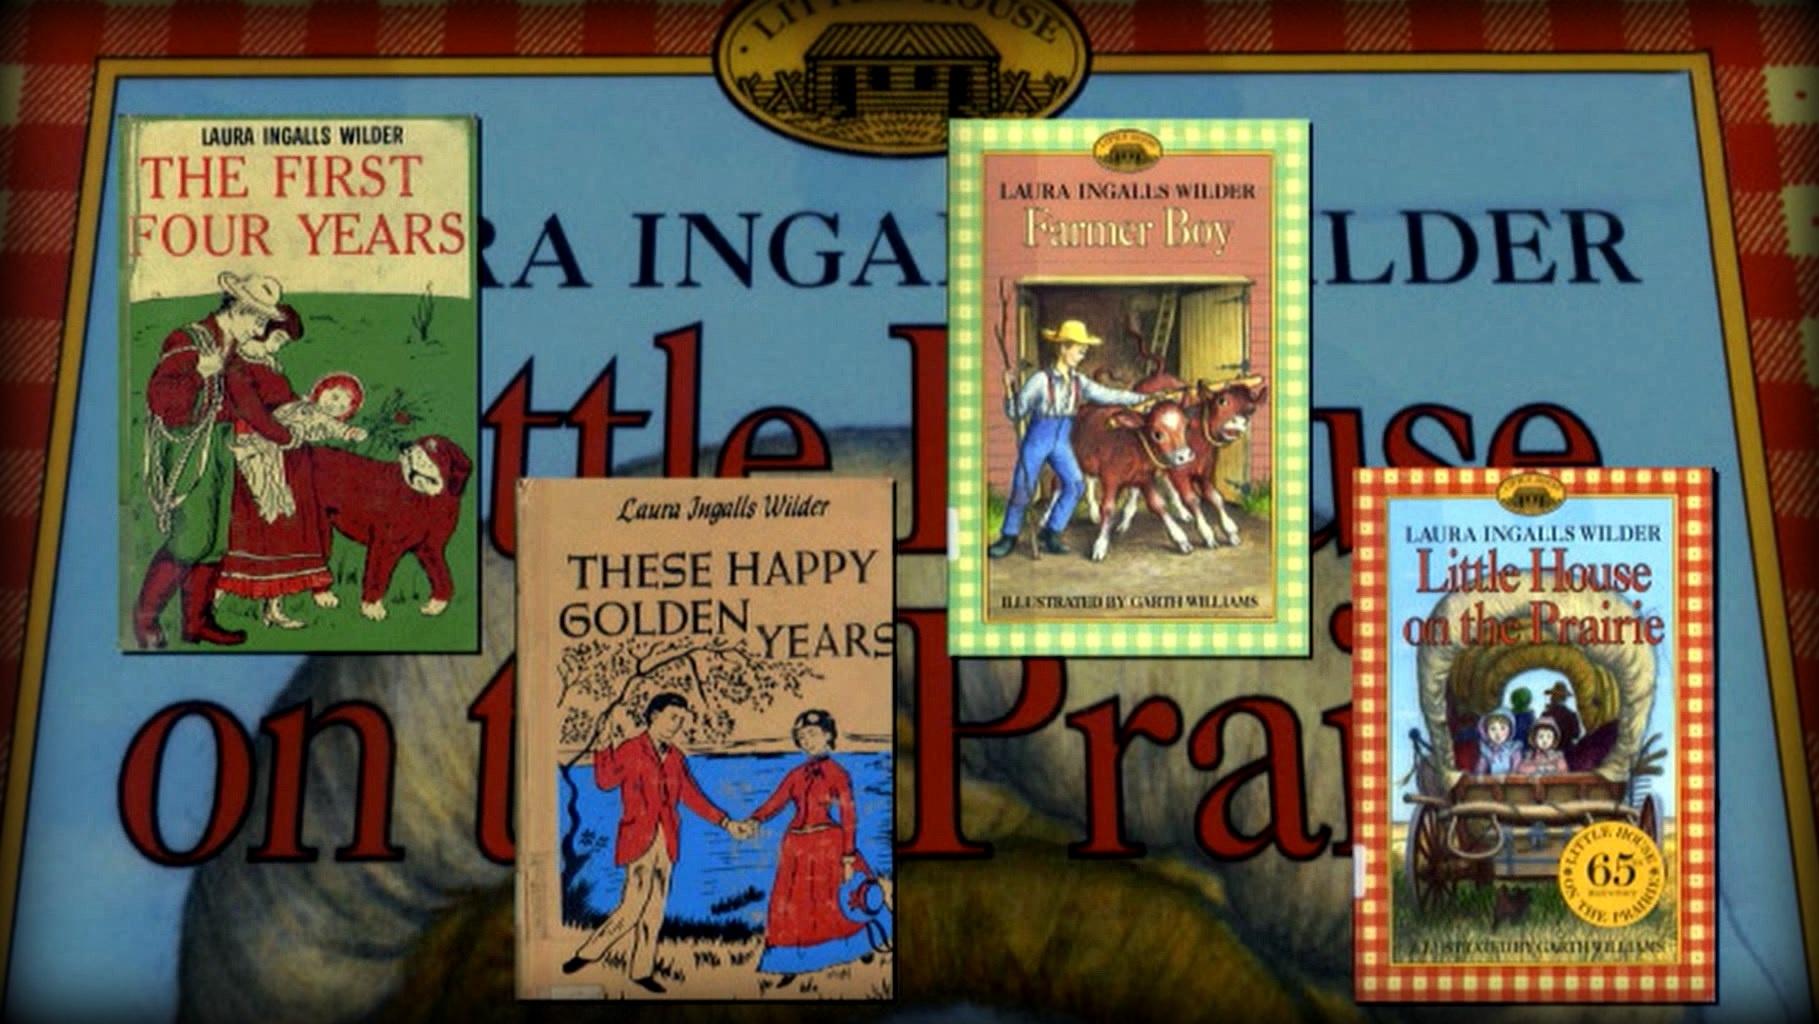 Collection of Laura Ingalls Wilder Books, including The First Four Years, Farmer Boy, These Happy Golden Years, and Little House on the Prairie. 